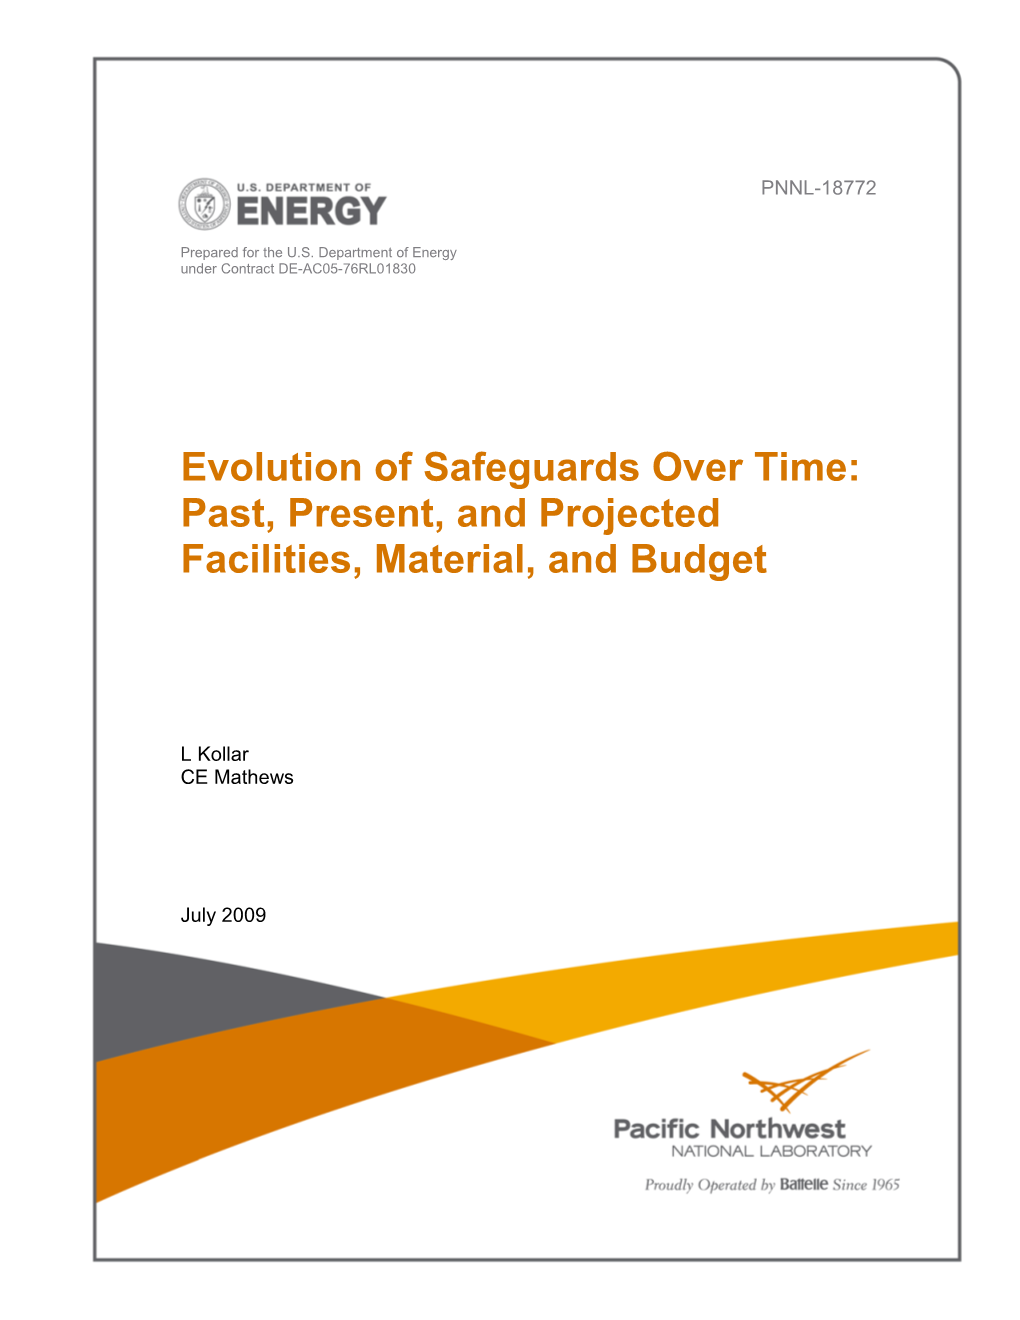 Evolution of Safeguards Over Time: Past, Present, and Projected Facilities, Material, and Budget